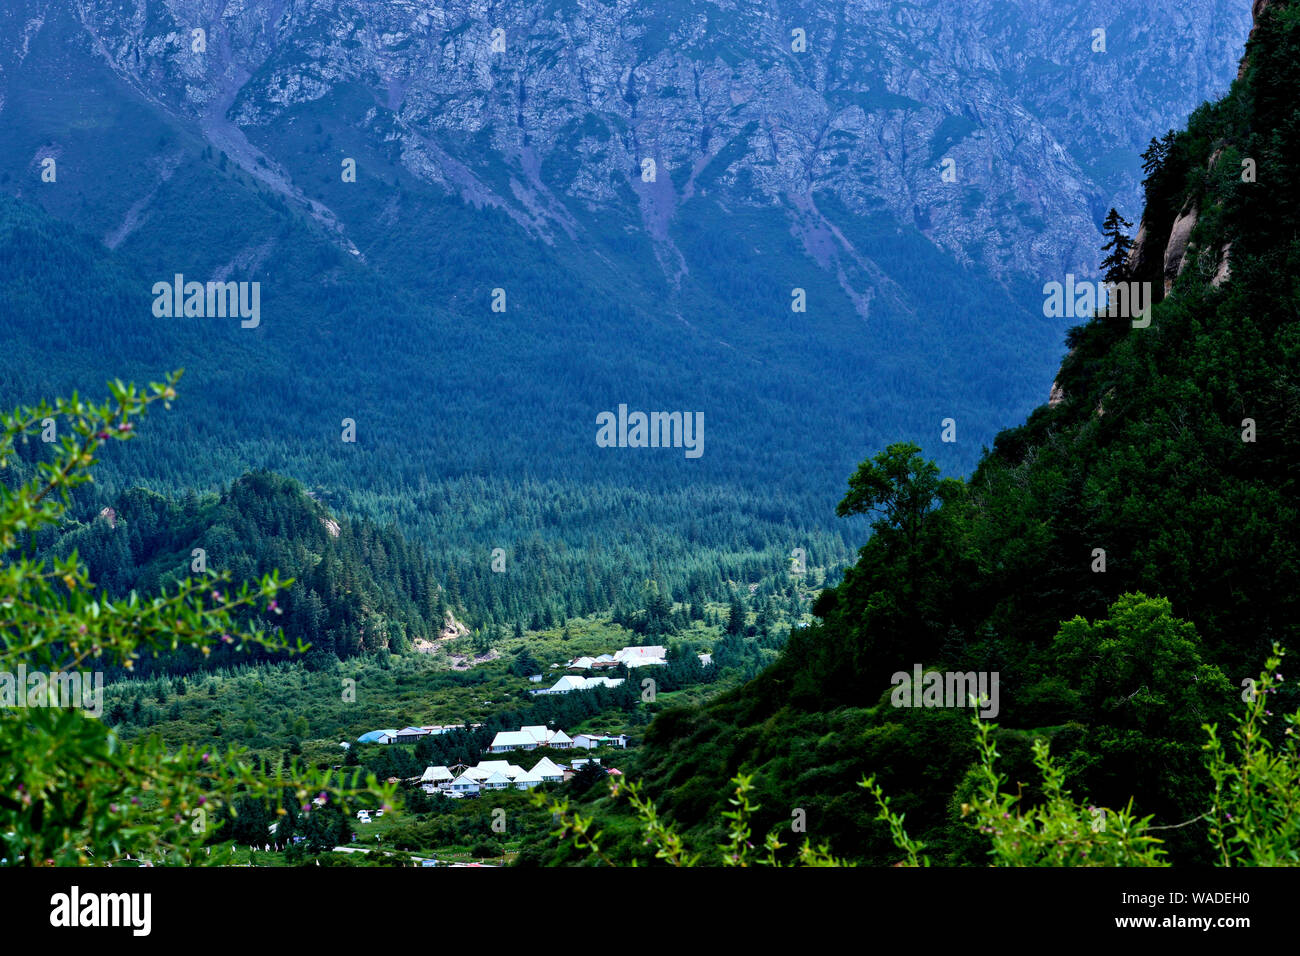 View from adjacent hill of villages scattering among Qilian Mountains and forest, Sunan Yugur Autonomous County, Zhangye city, northwest China's Gansu Stock Photo